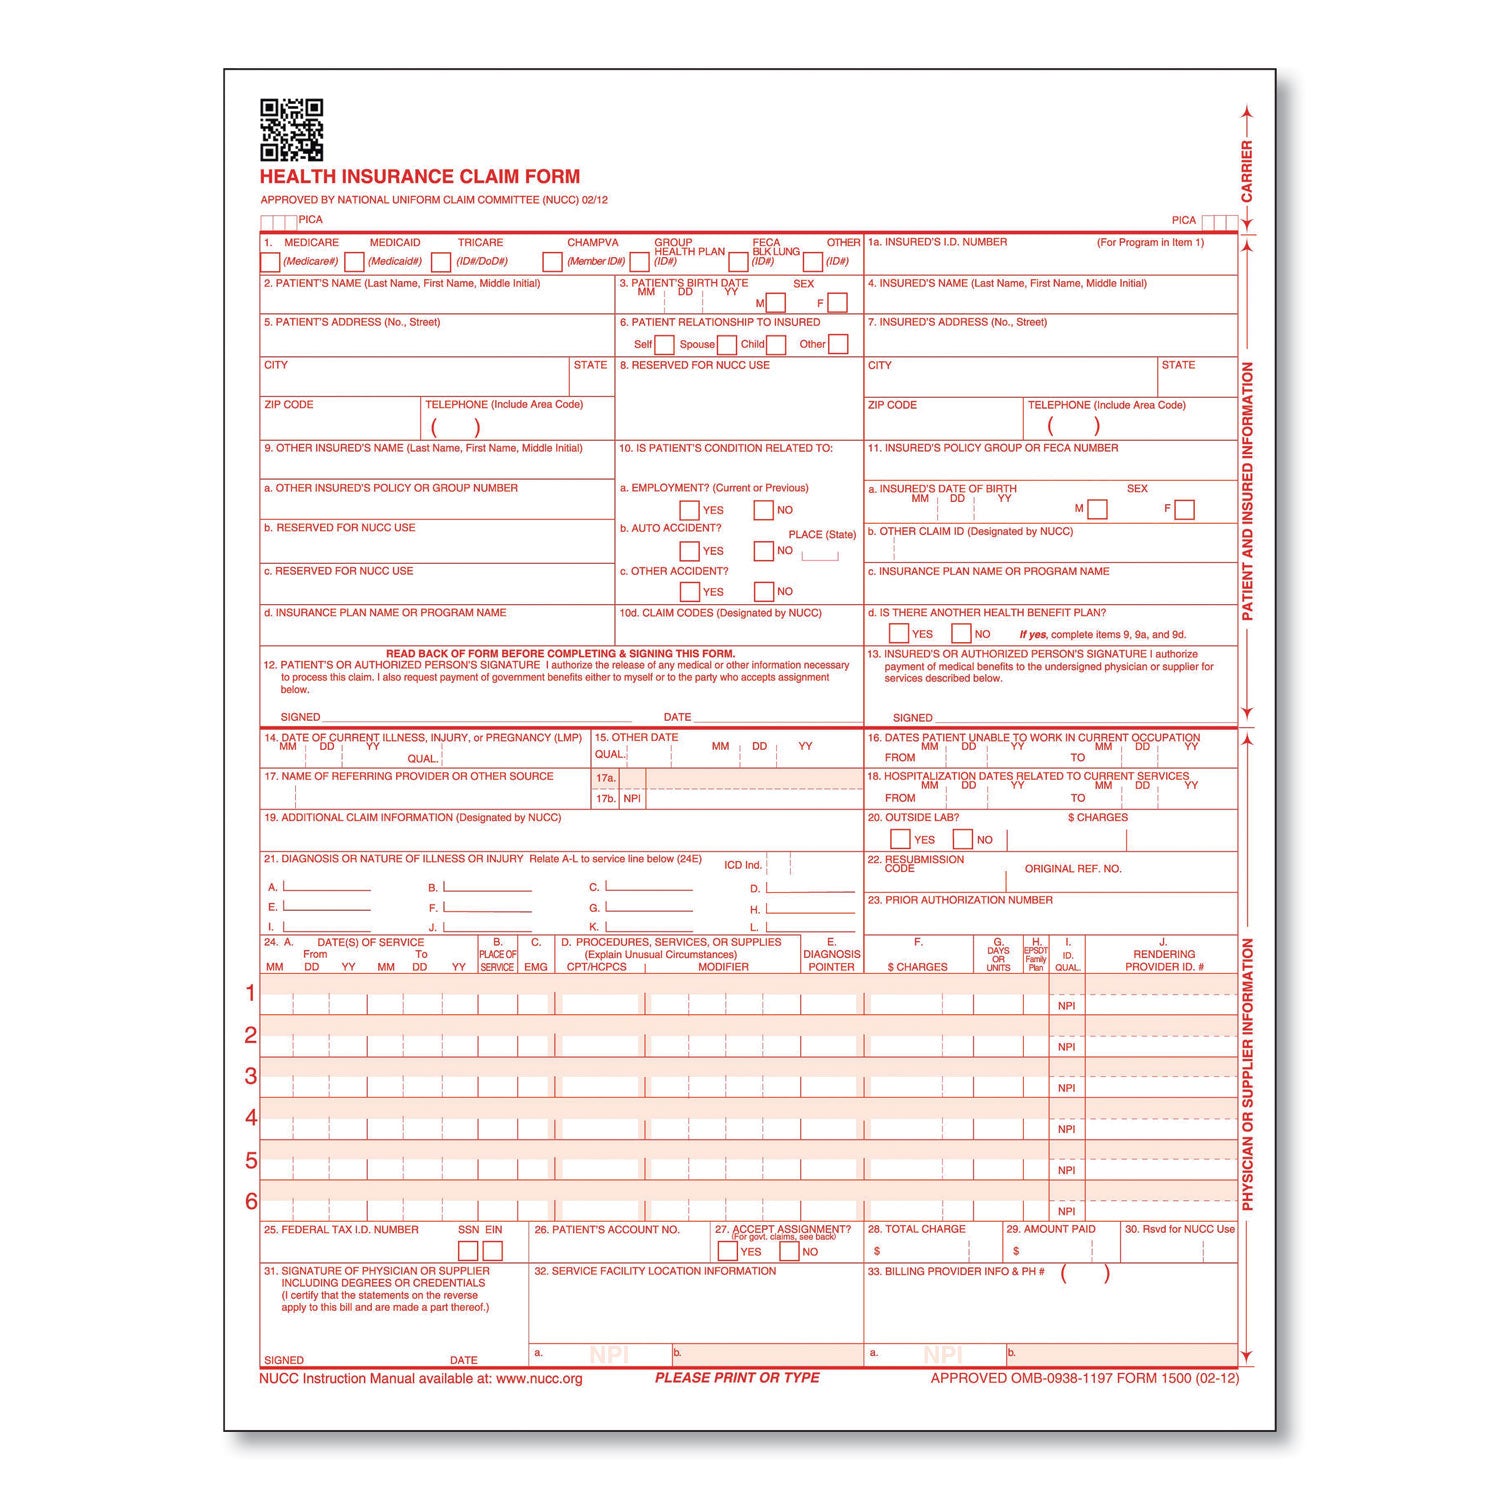 cms-1500-health-insurance-claim-form-one-part-no-copies-85-x-11-250-forms-total_tfpcms12lc250 - 1